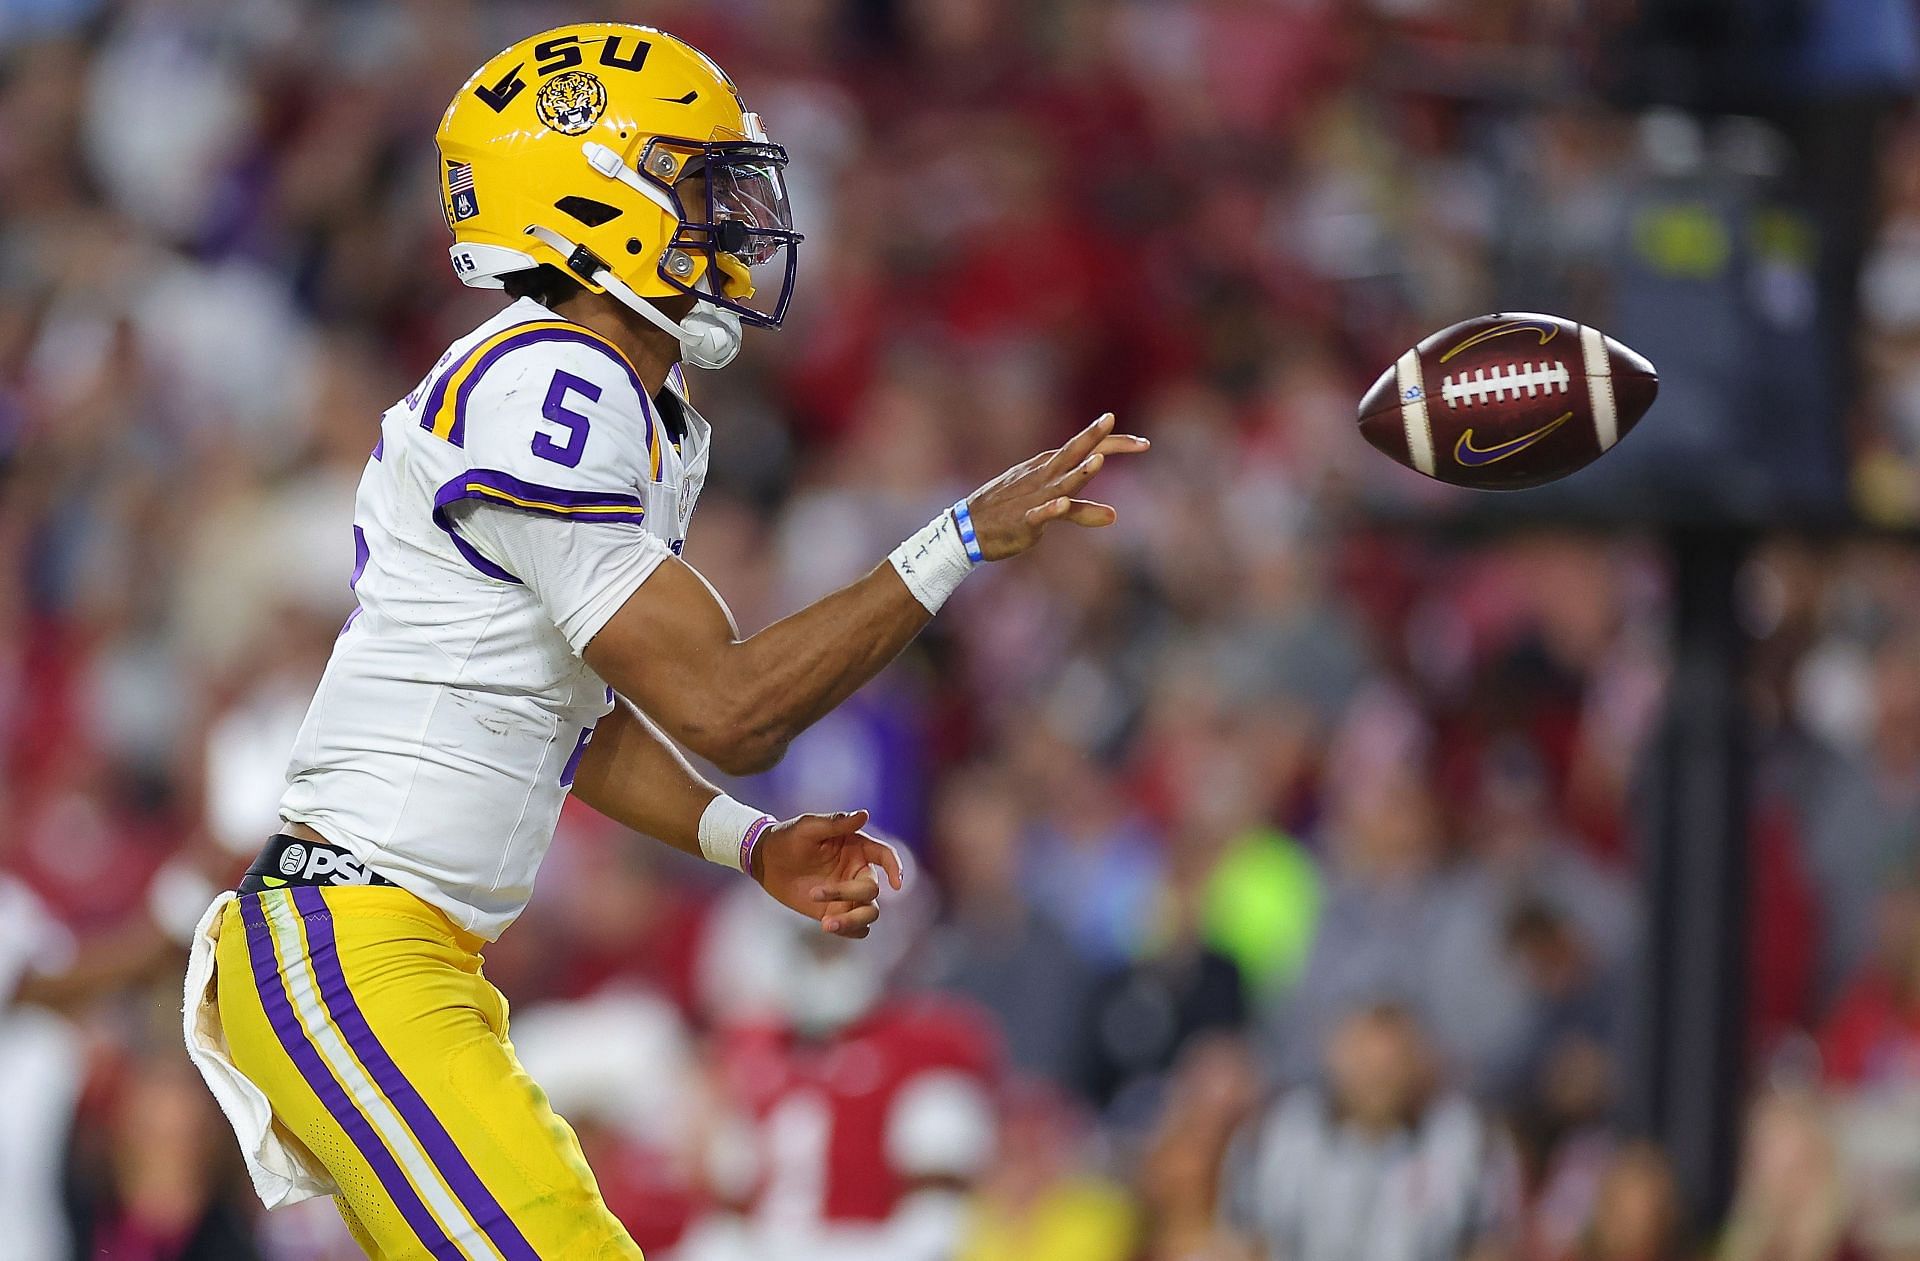 What happened to Jayden Daniels' elbow? Sports physician breaks down QB's arm condition, which goes viral during LSU Pro Day